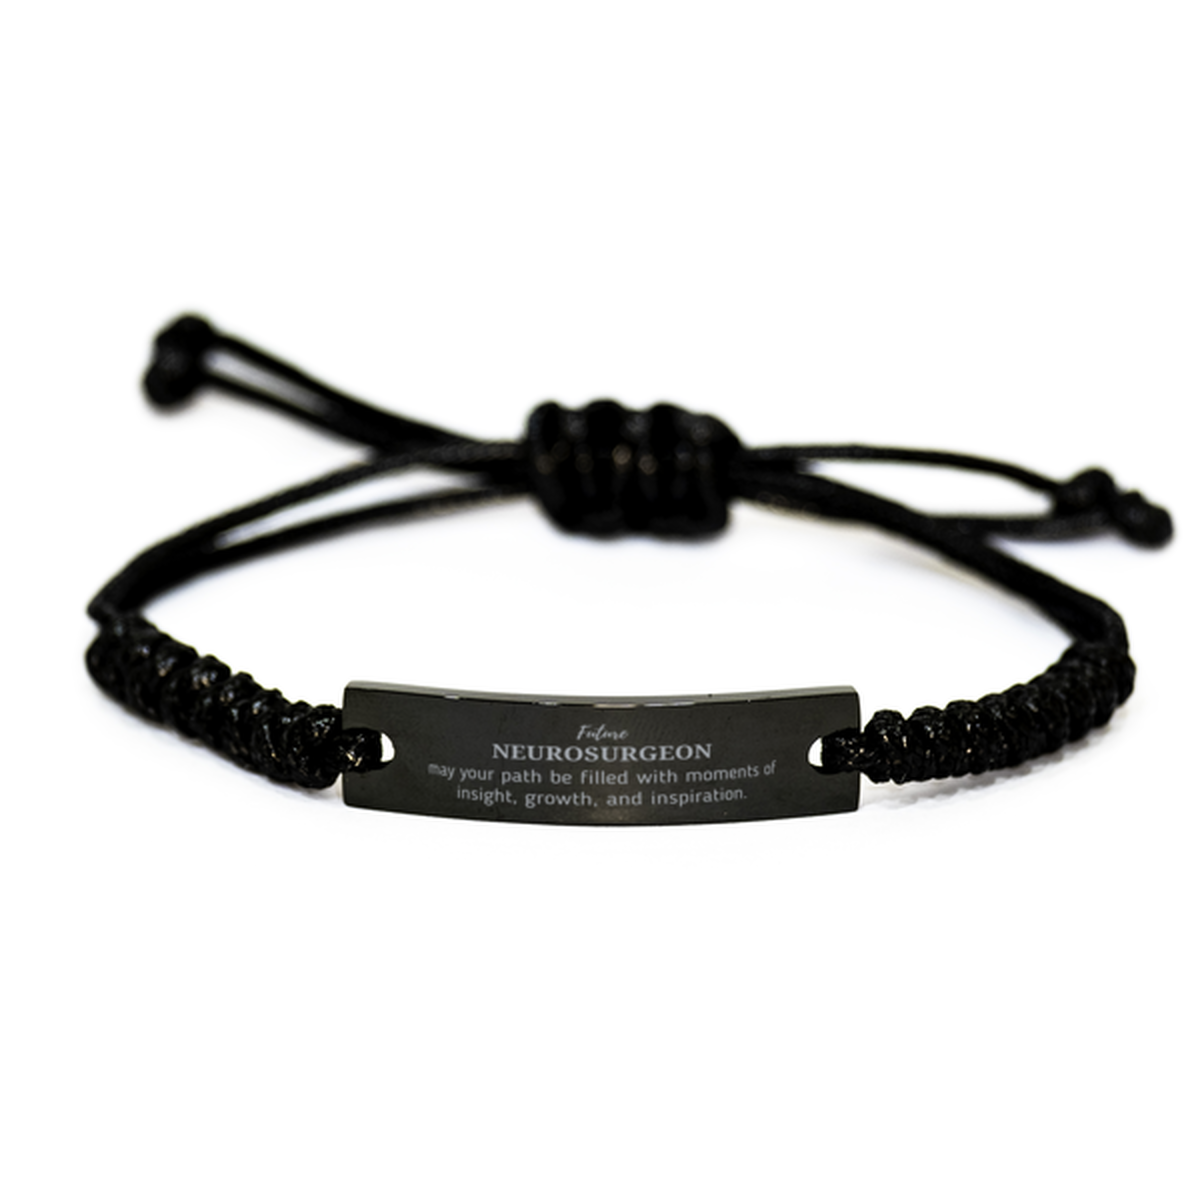 Future Neurosurgeon Gifts, May your path be filled with moments of insight, Graduation Gifts for New Neurosurgeon, Christmas Unique Black Rope Bracelet For Men, Women, Friends